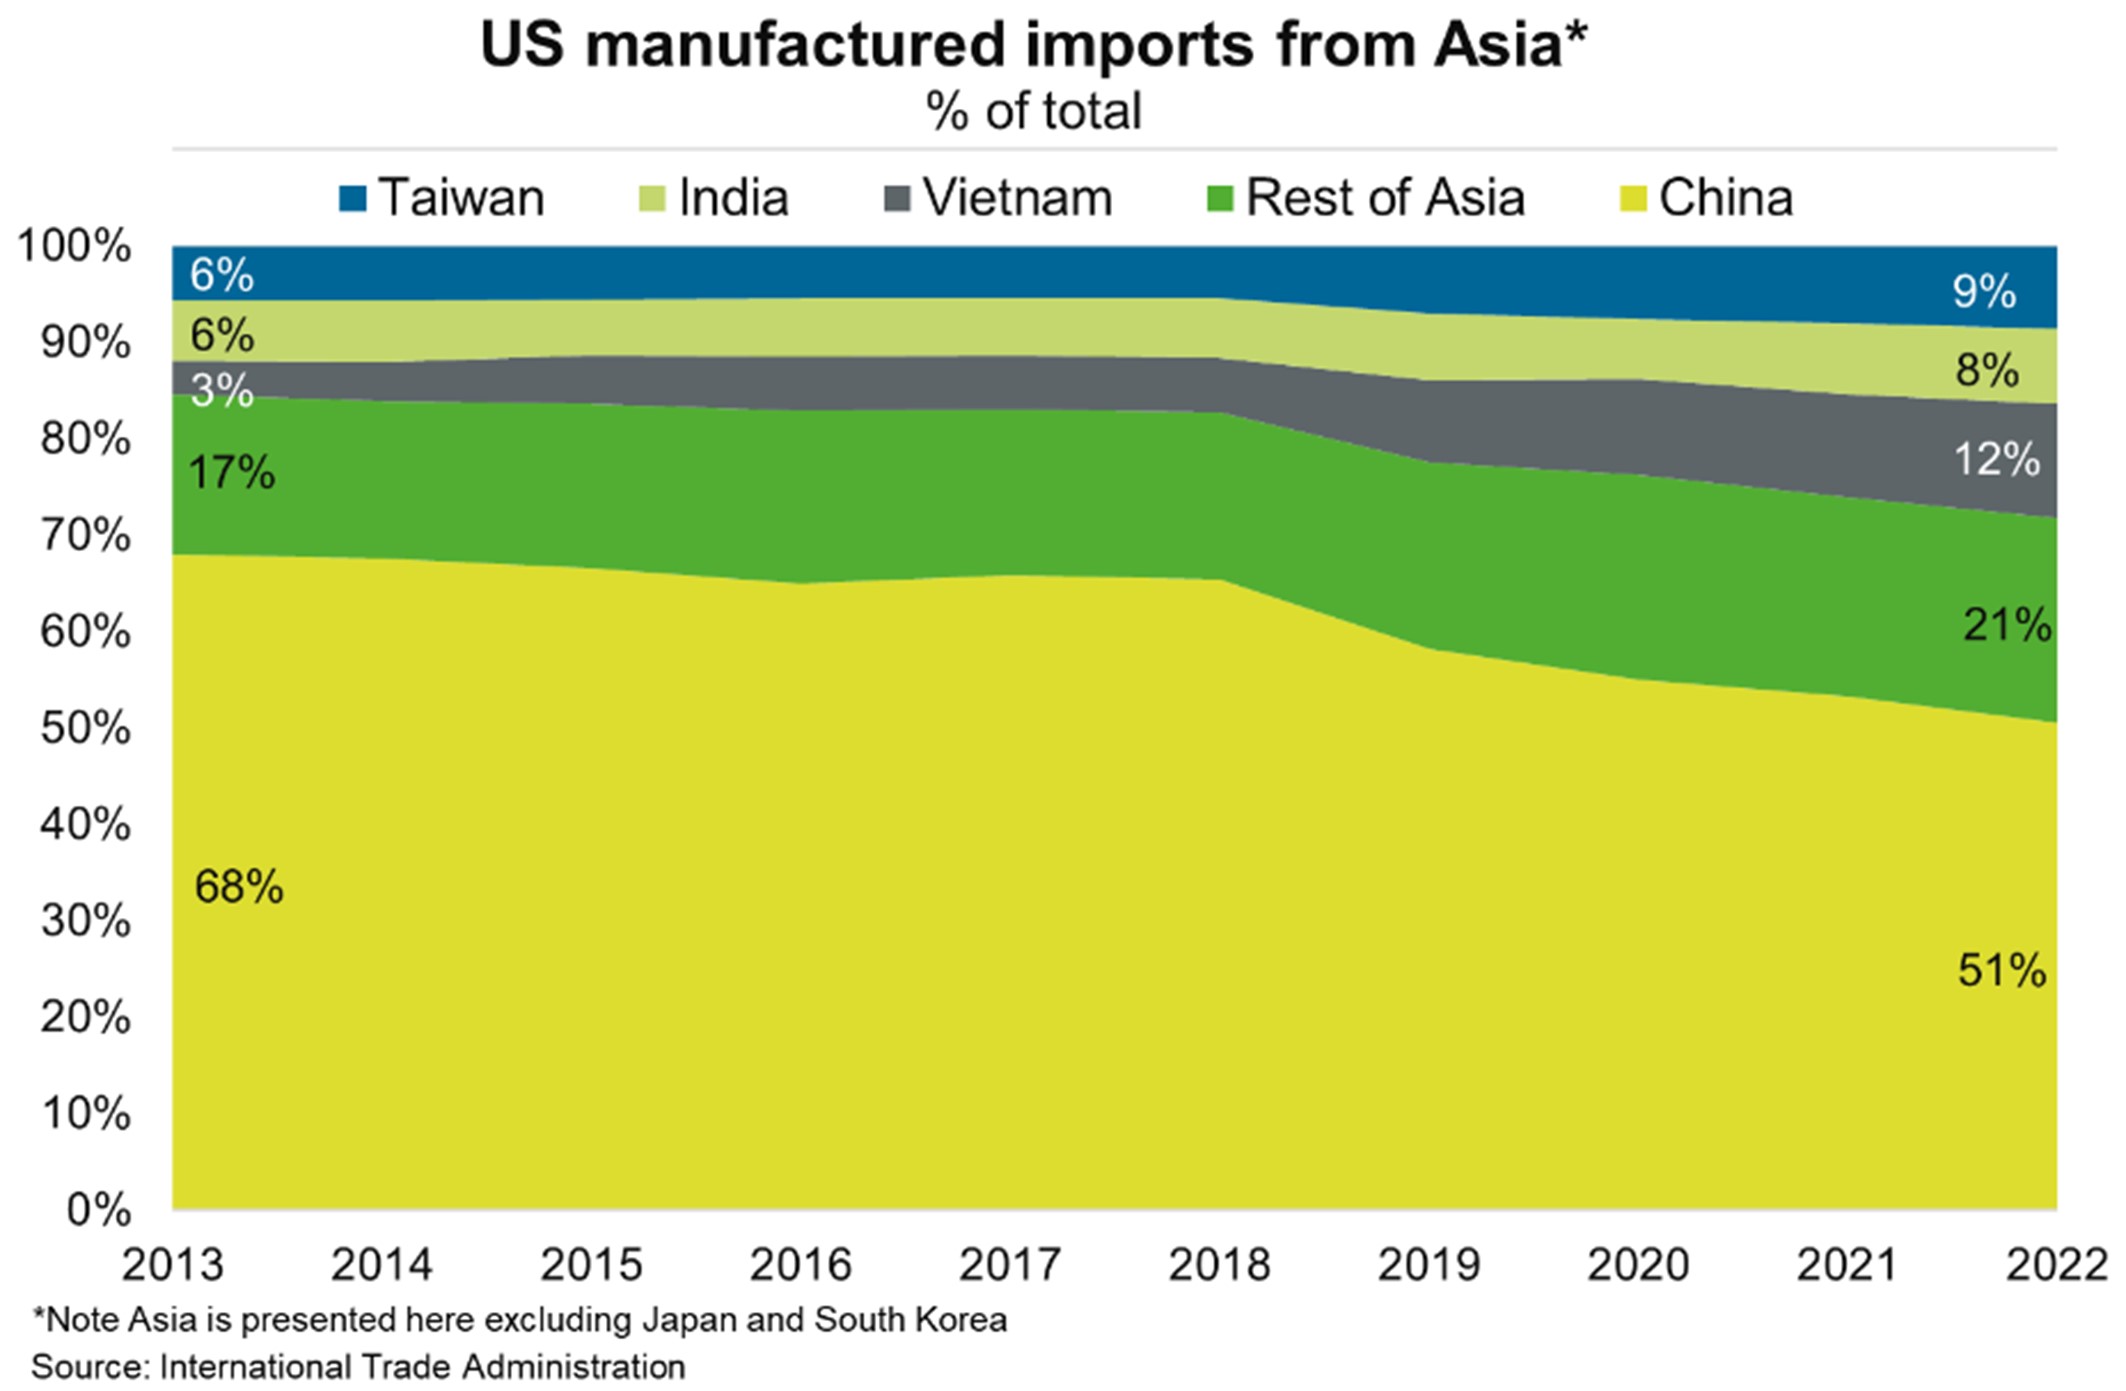 Chinese goods made up about 50% of US manufactured imports from Asian countries (excluding Japan and South Korea) in 2022, well down from nearly 70% in 2013.